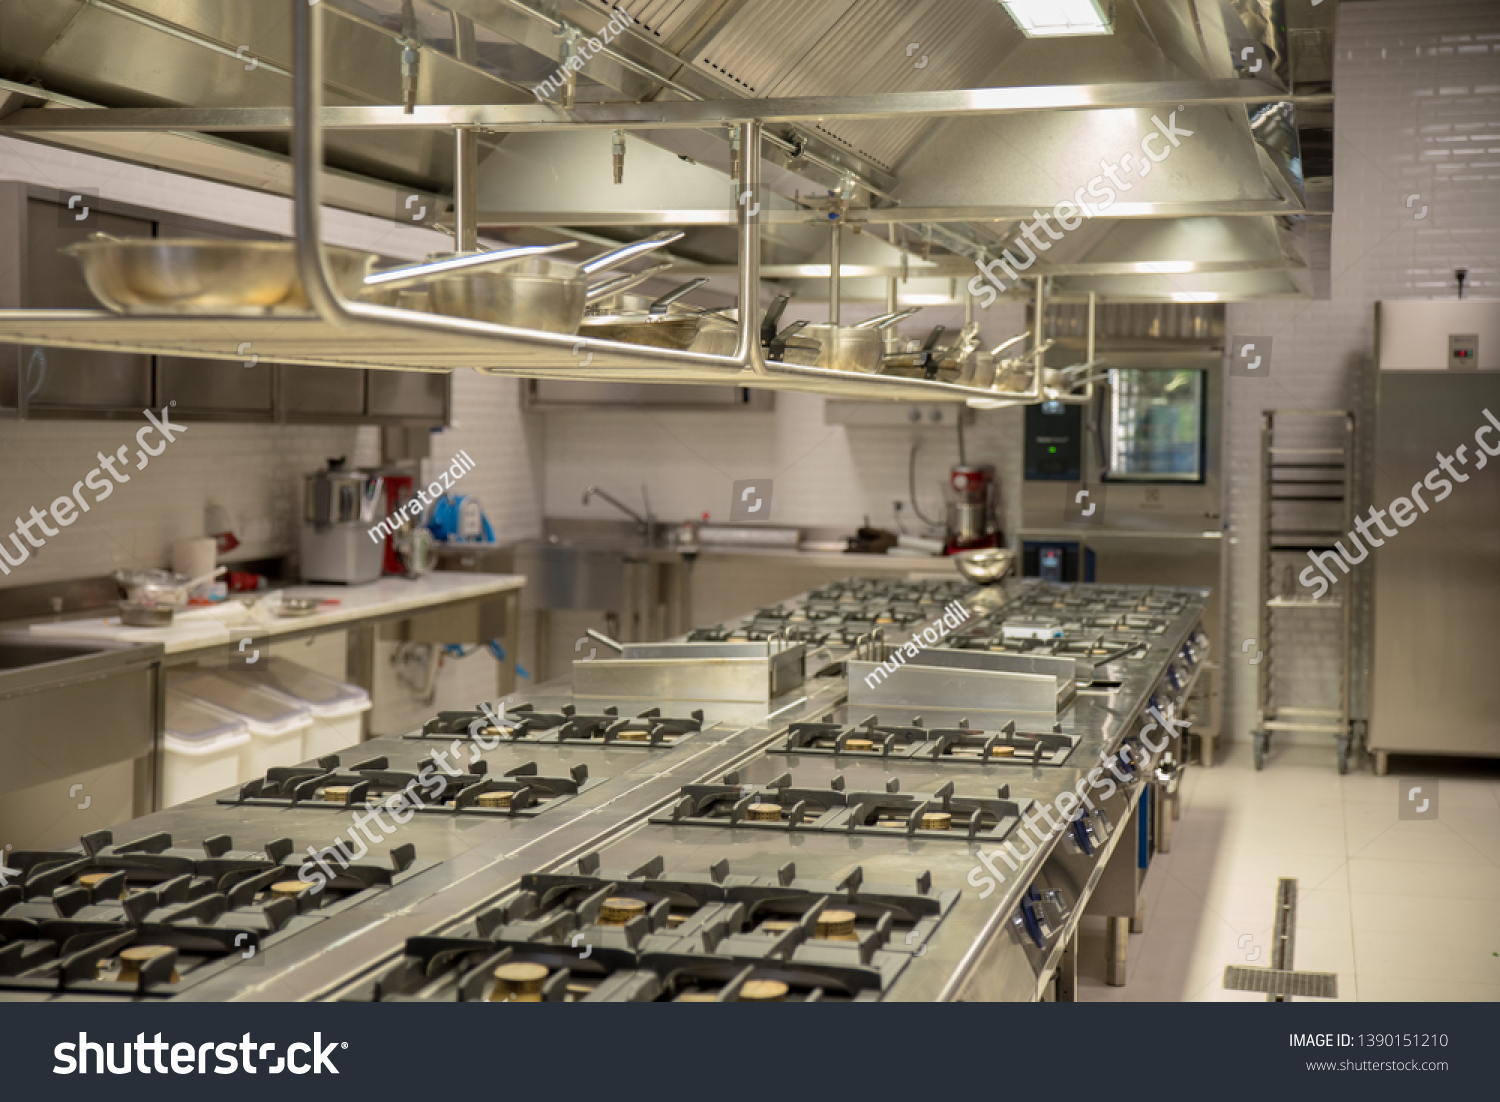 Stock Photo Industrial Kitchen With Stainless Steel Counters 1390151210 